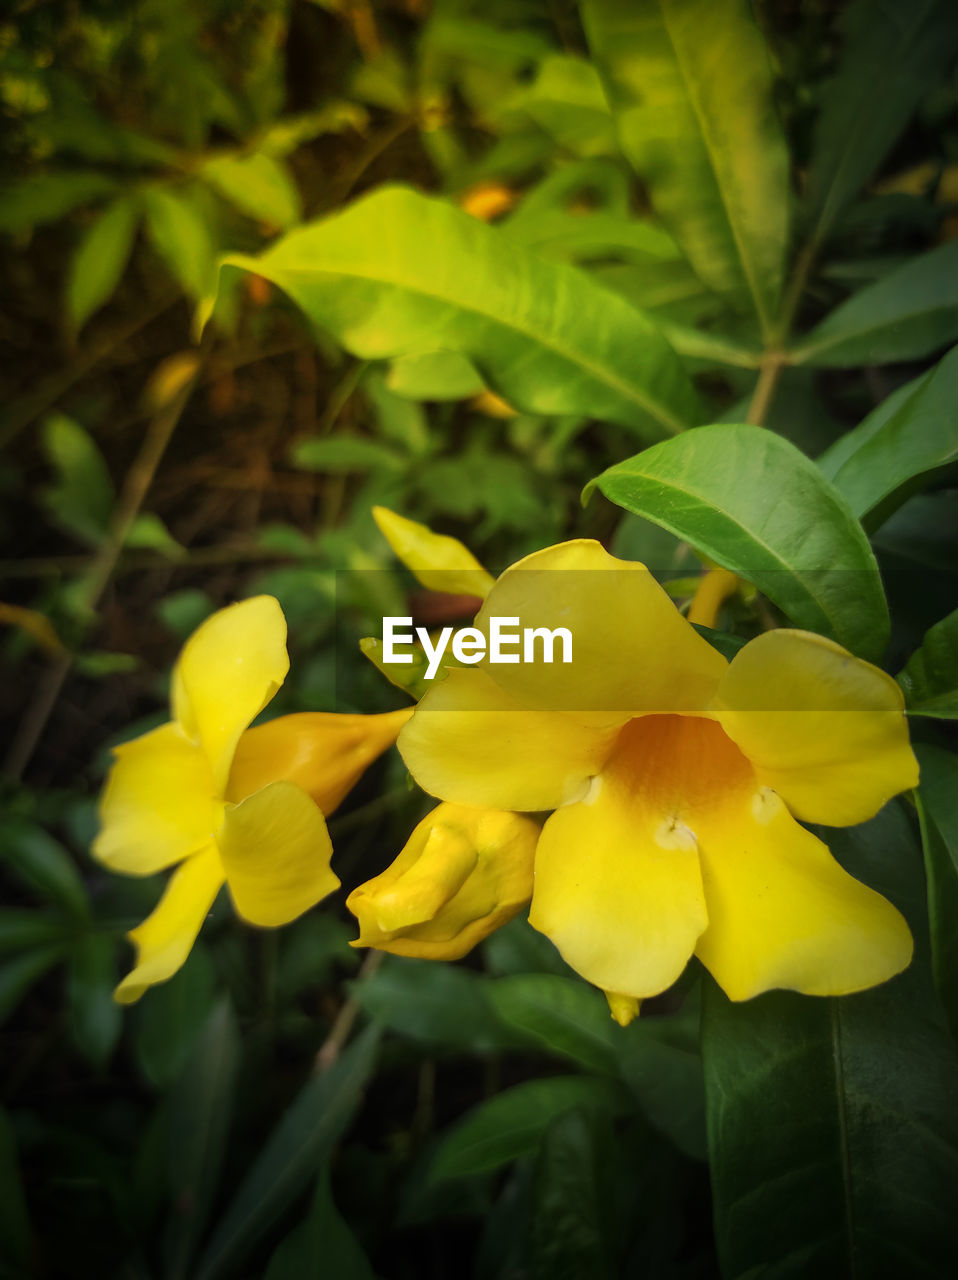 plant, yellow, flower, flowering plant, freshness, beauty in nature, close-up, growth, nature, petal, leaf, plant part, flower head, fragility, inflorescence, green, no people, macro photography, outdoors, focus on foreground, blossom, springtime, vibrant color, botany